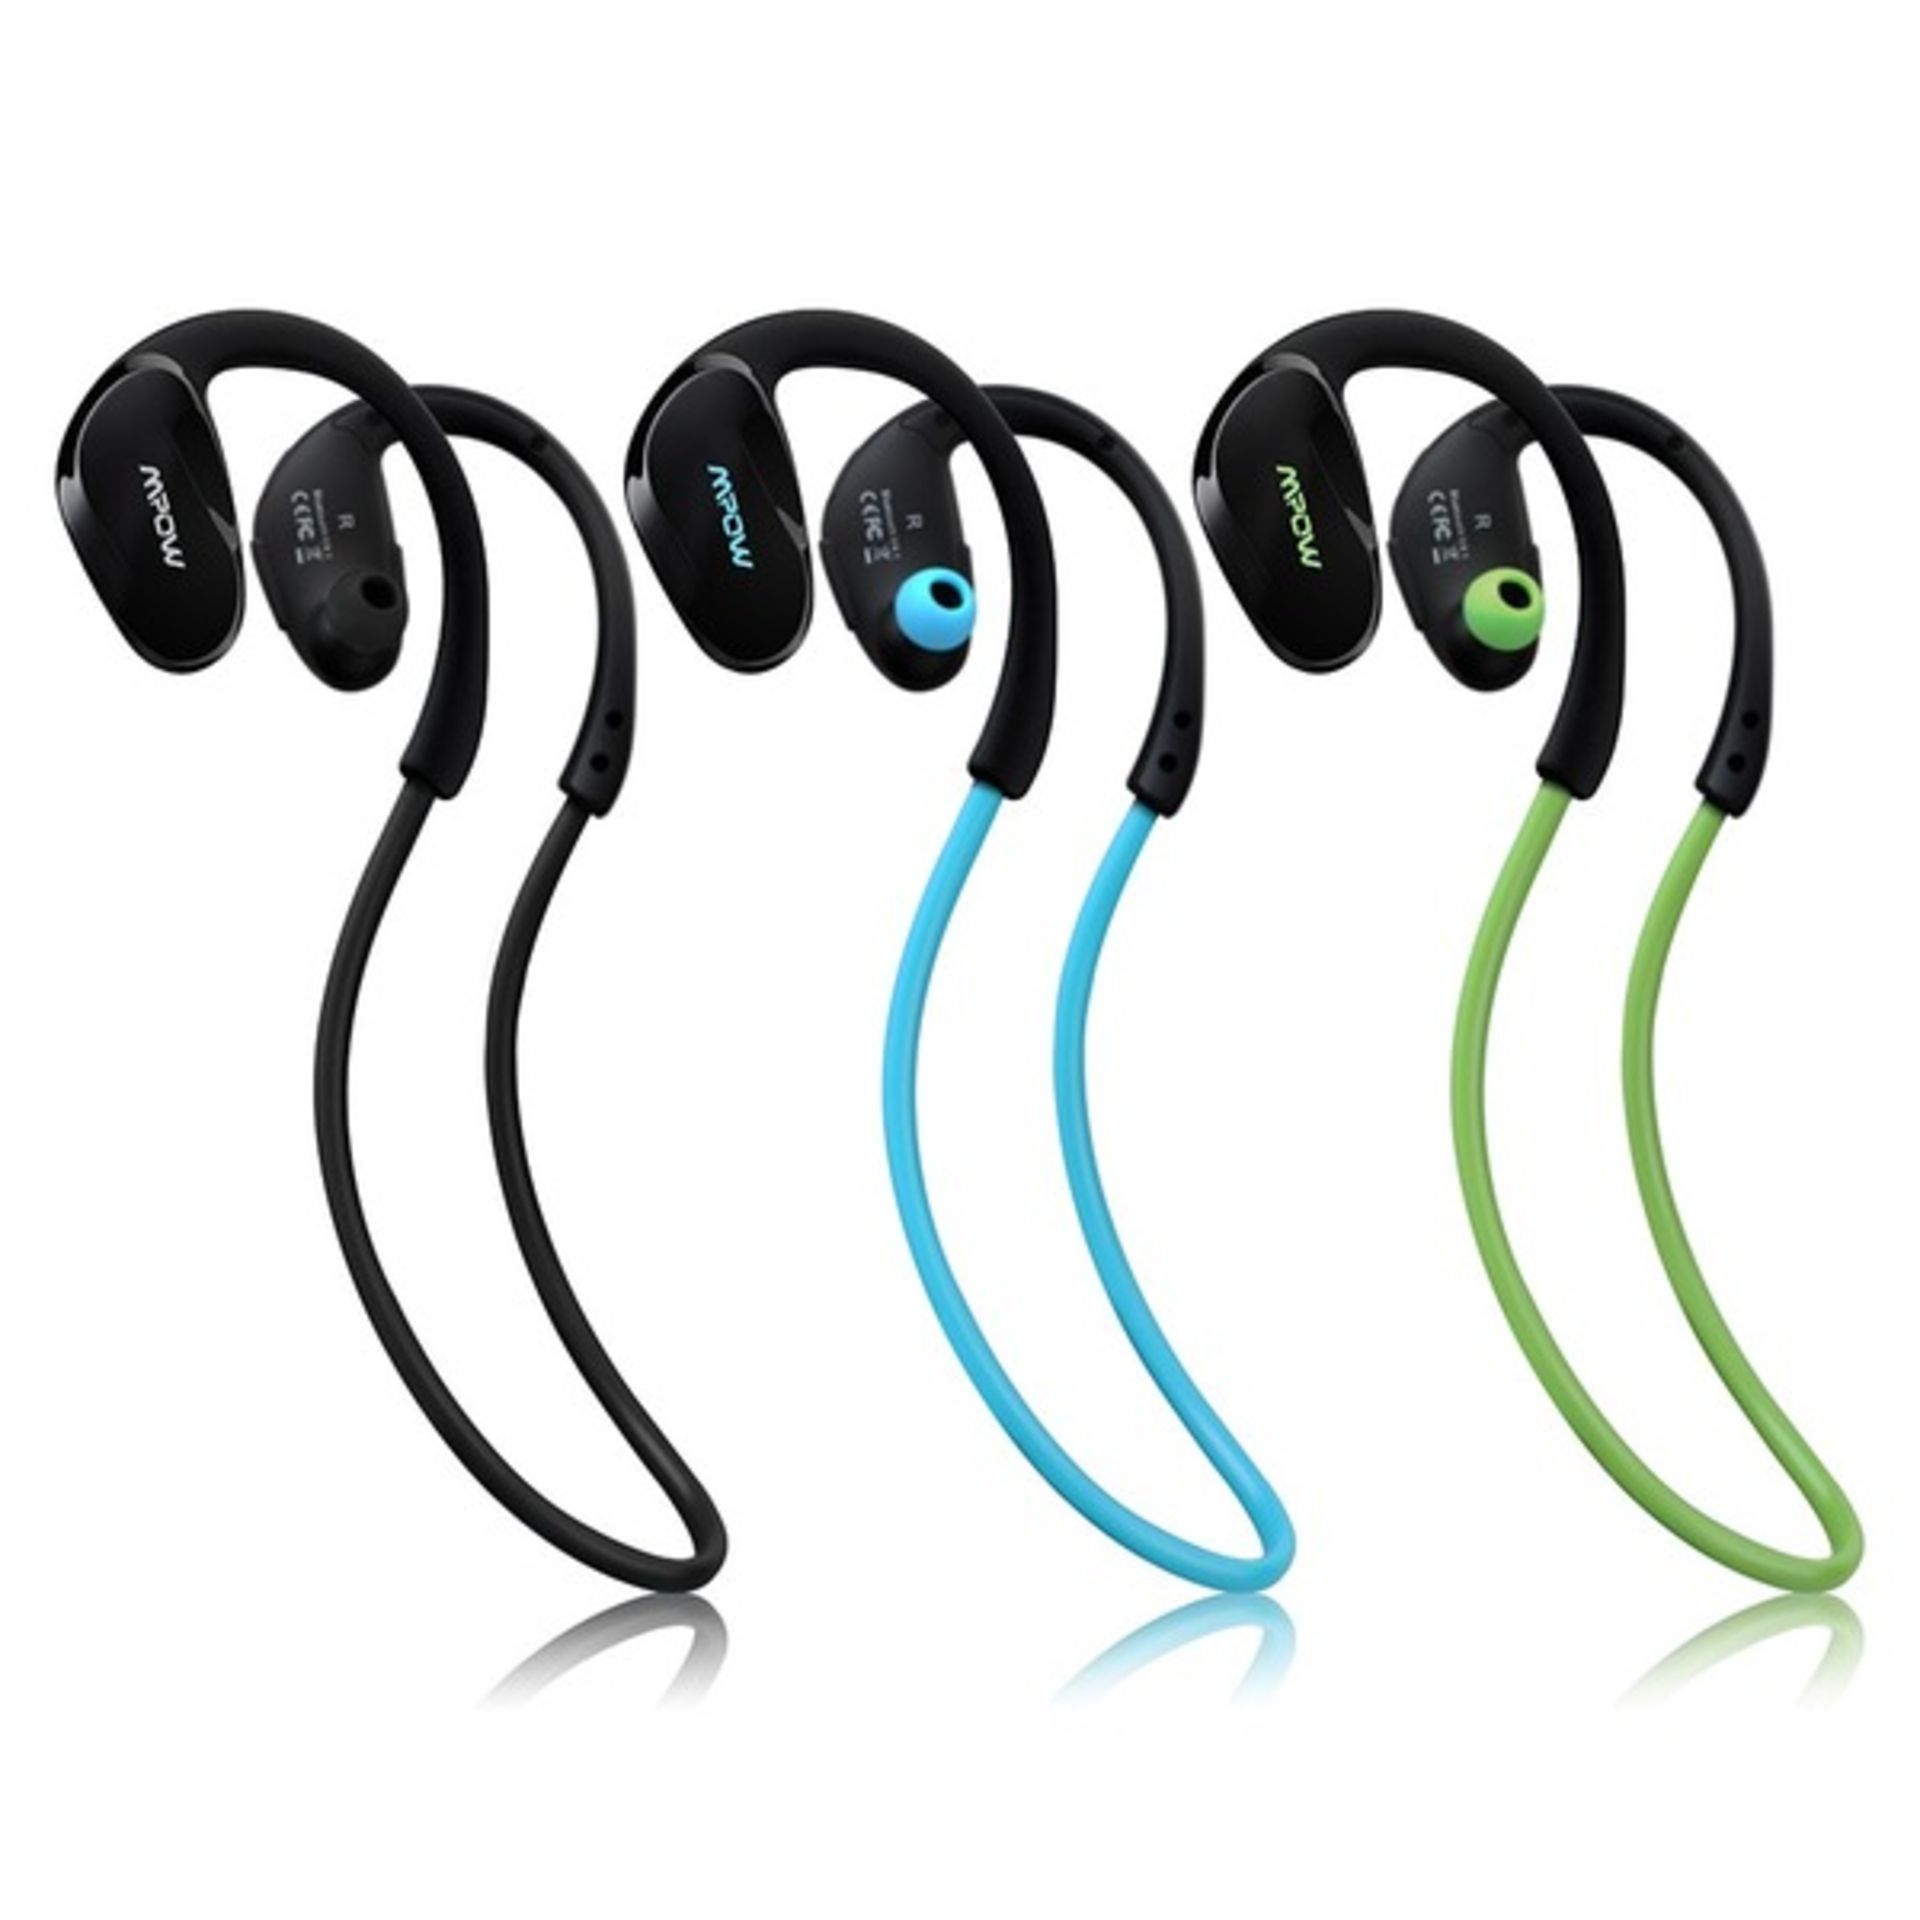 V Brand New Pair of Bluetooth Earphones/Headset (All Boxed) - Colours and Styles/Makes May Vary - - Bild 3 aus 7